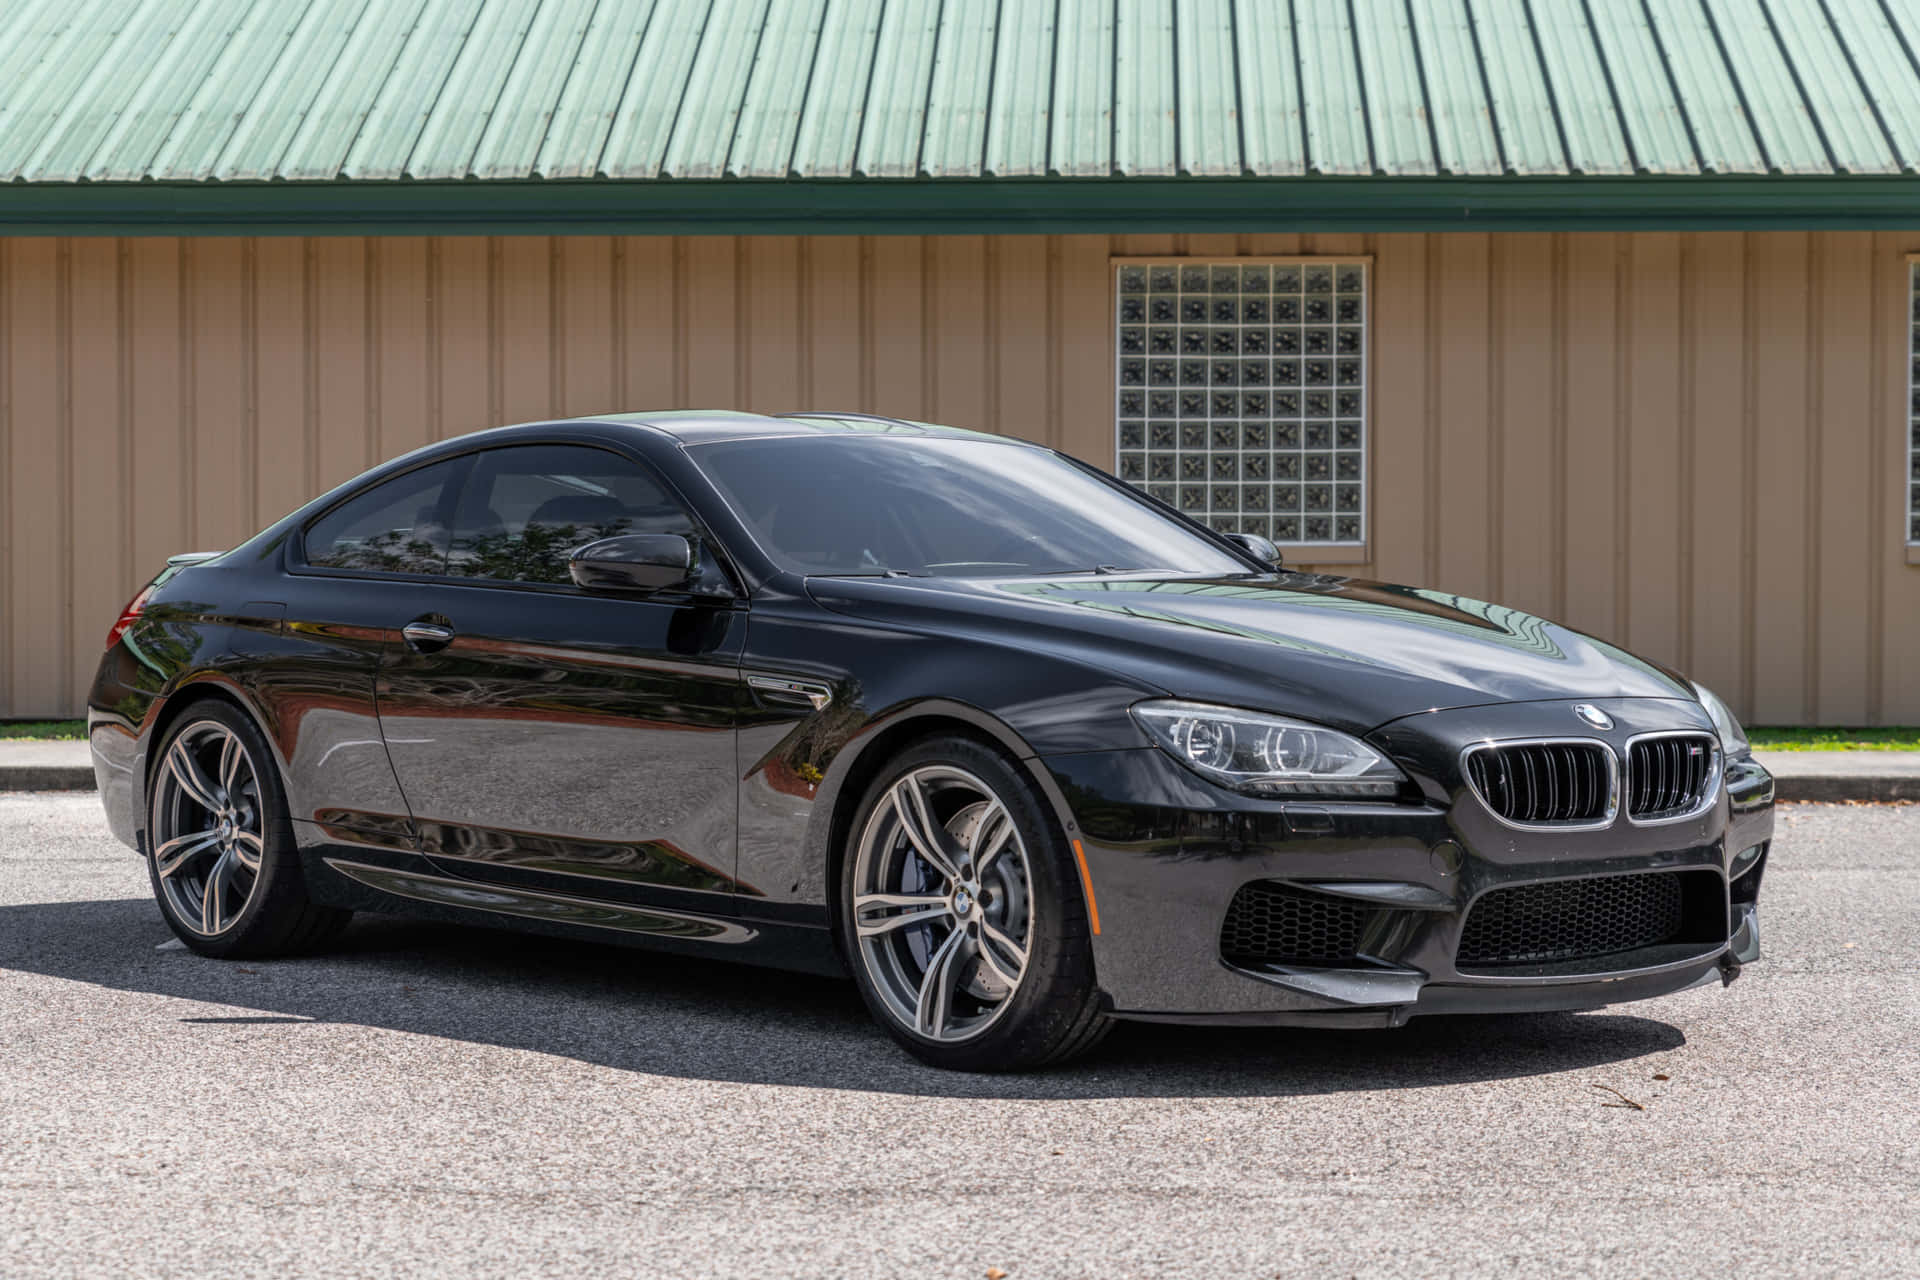 Captivating BMW M6 in Action Wallpaper